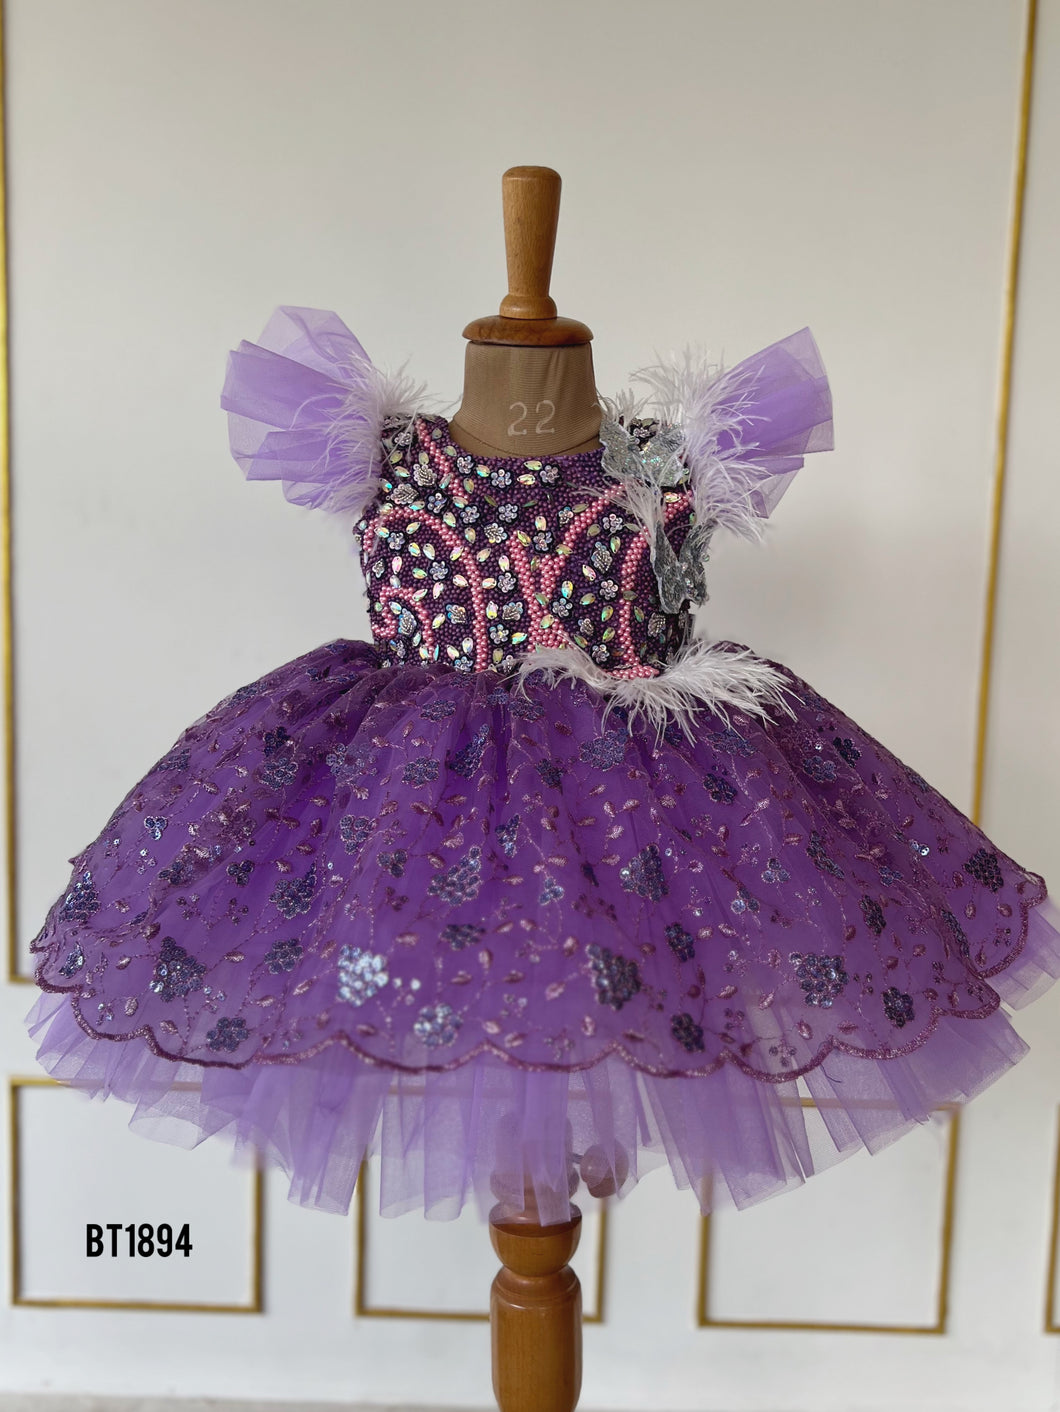 BT1894 Lilac Princess - Bejeweled Party Dress for Your Little Star ✨